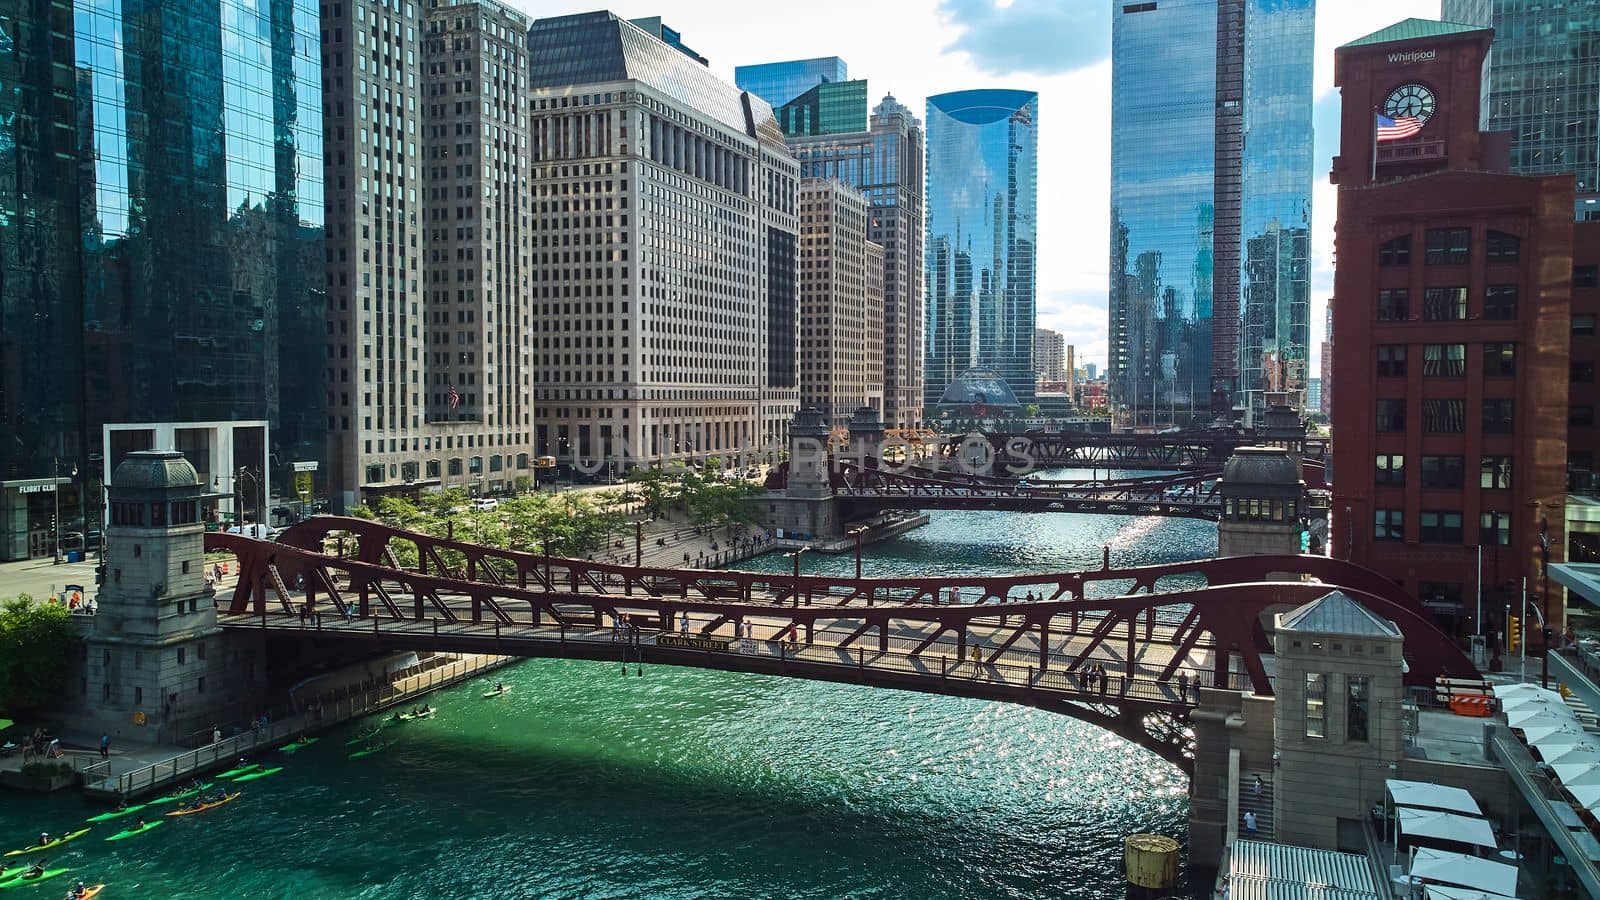 Beautiful aerial view of bridge over Chicago ship canals surrounded by skyscrapers by njproductions